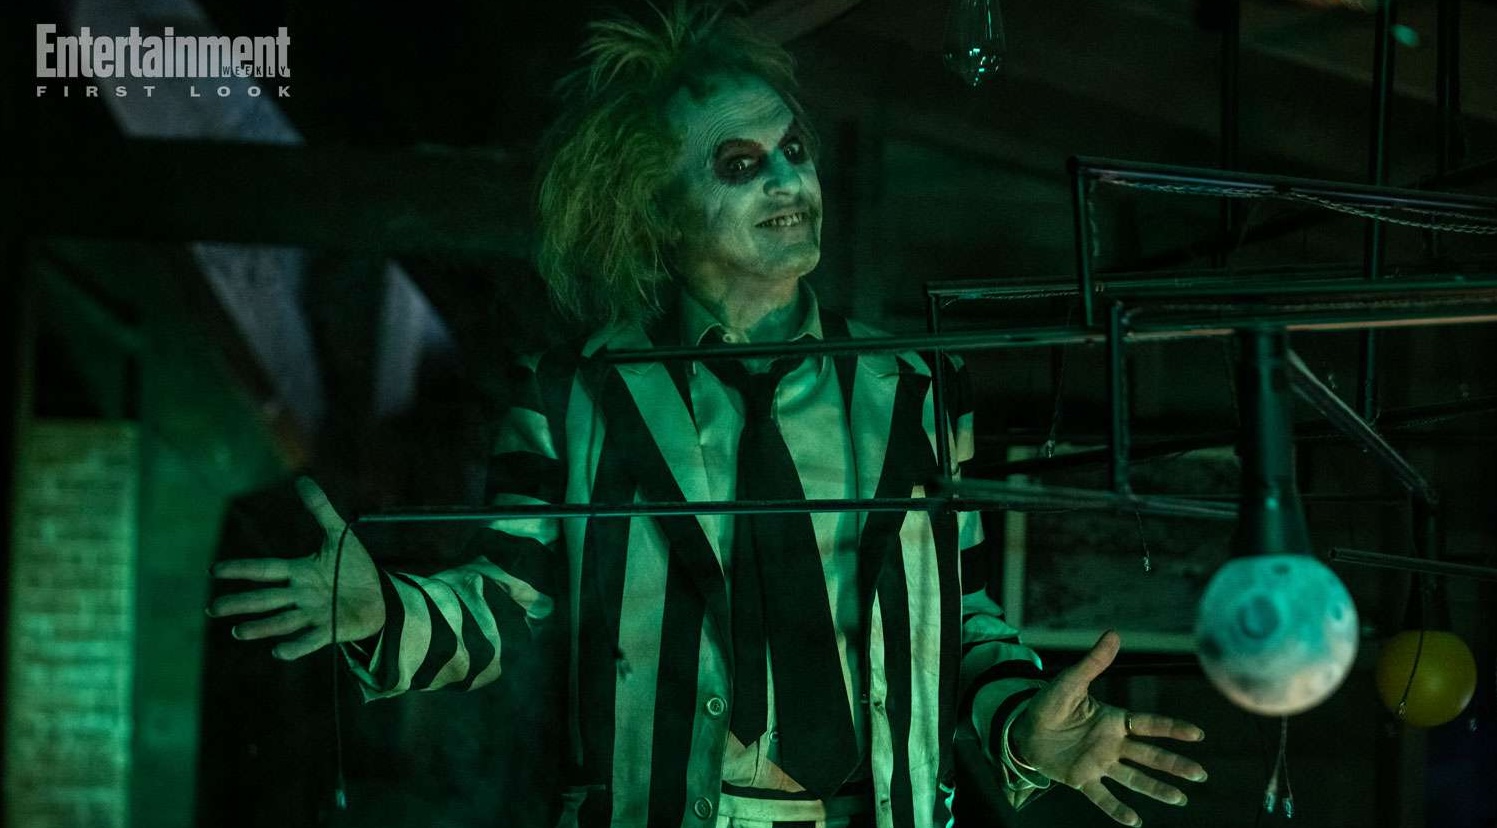 Beetlejuice is Back! Everything You Need to Know About the Spooktacular Reboot